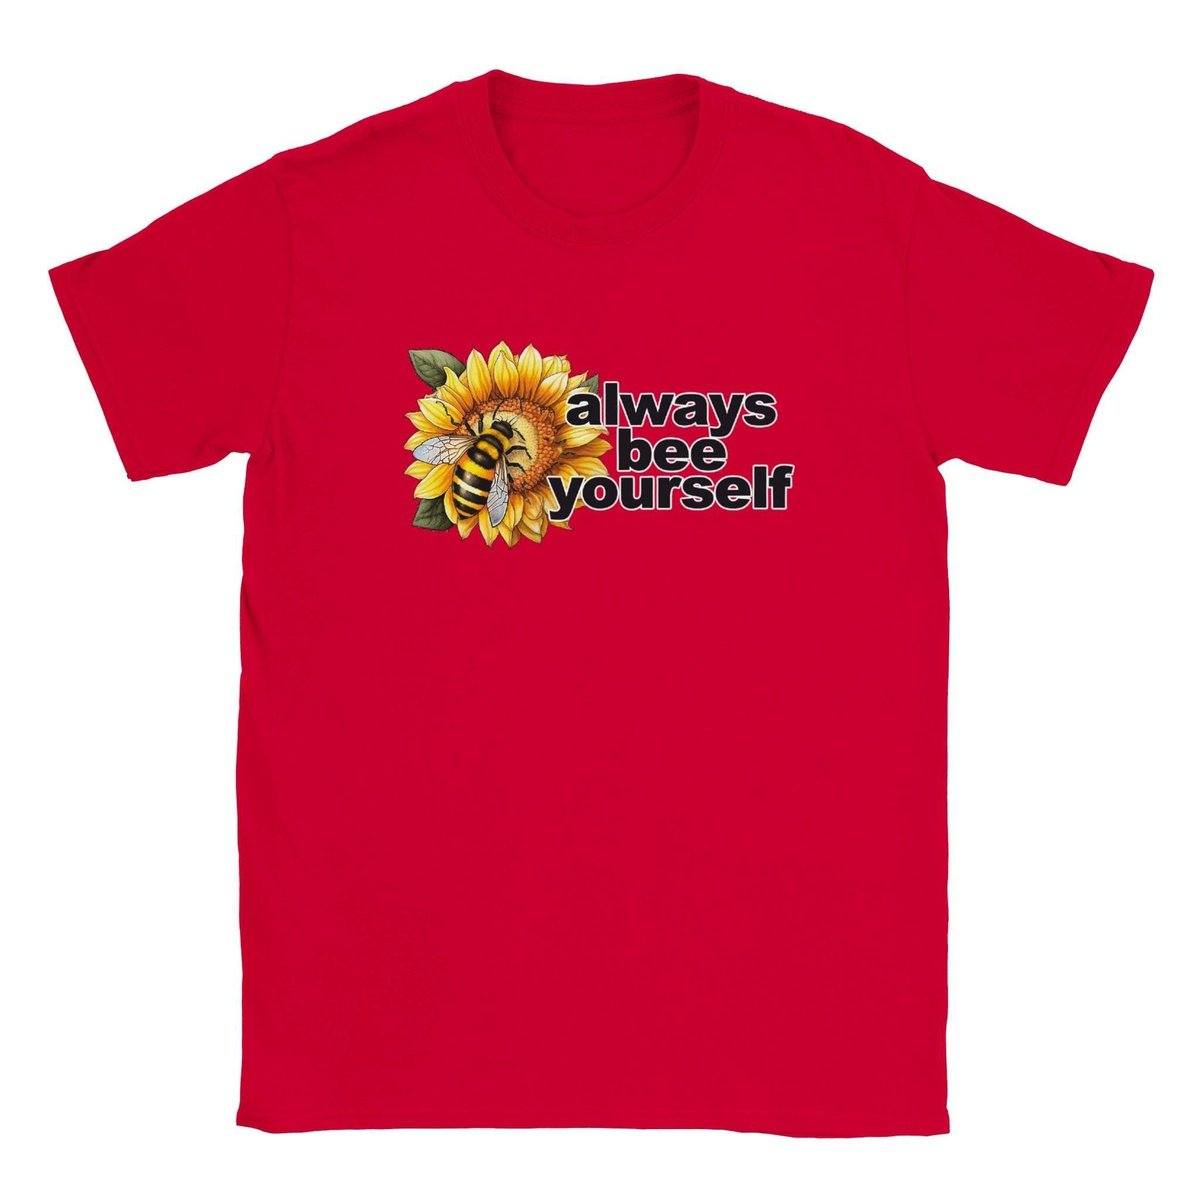 Always bee yourself T-Shirt Adults T-Shirts Unisex Red / S BC Australia